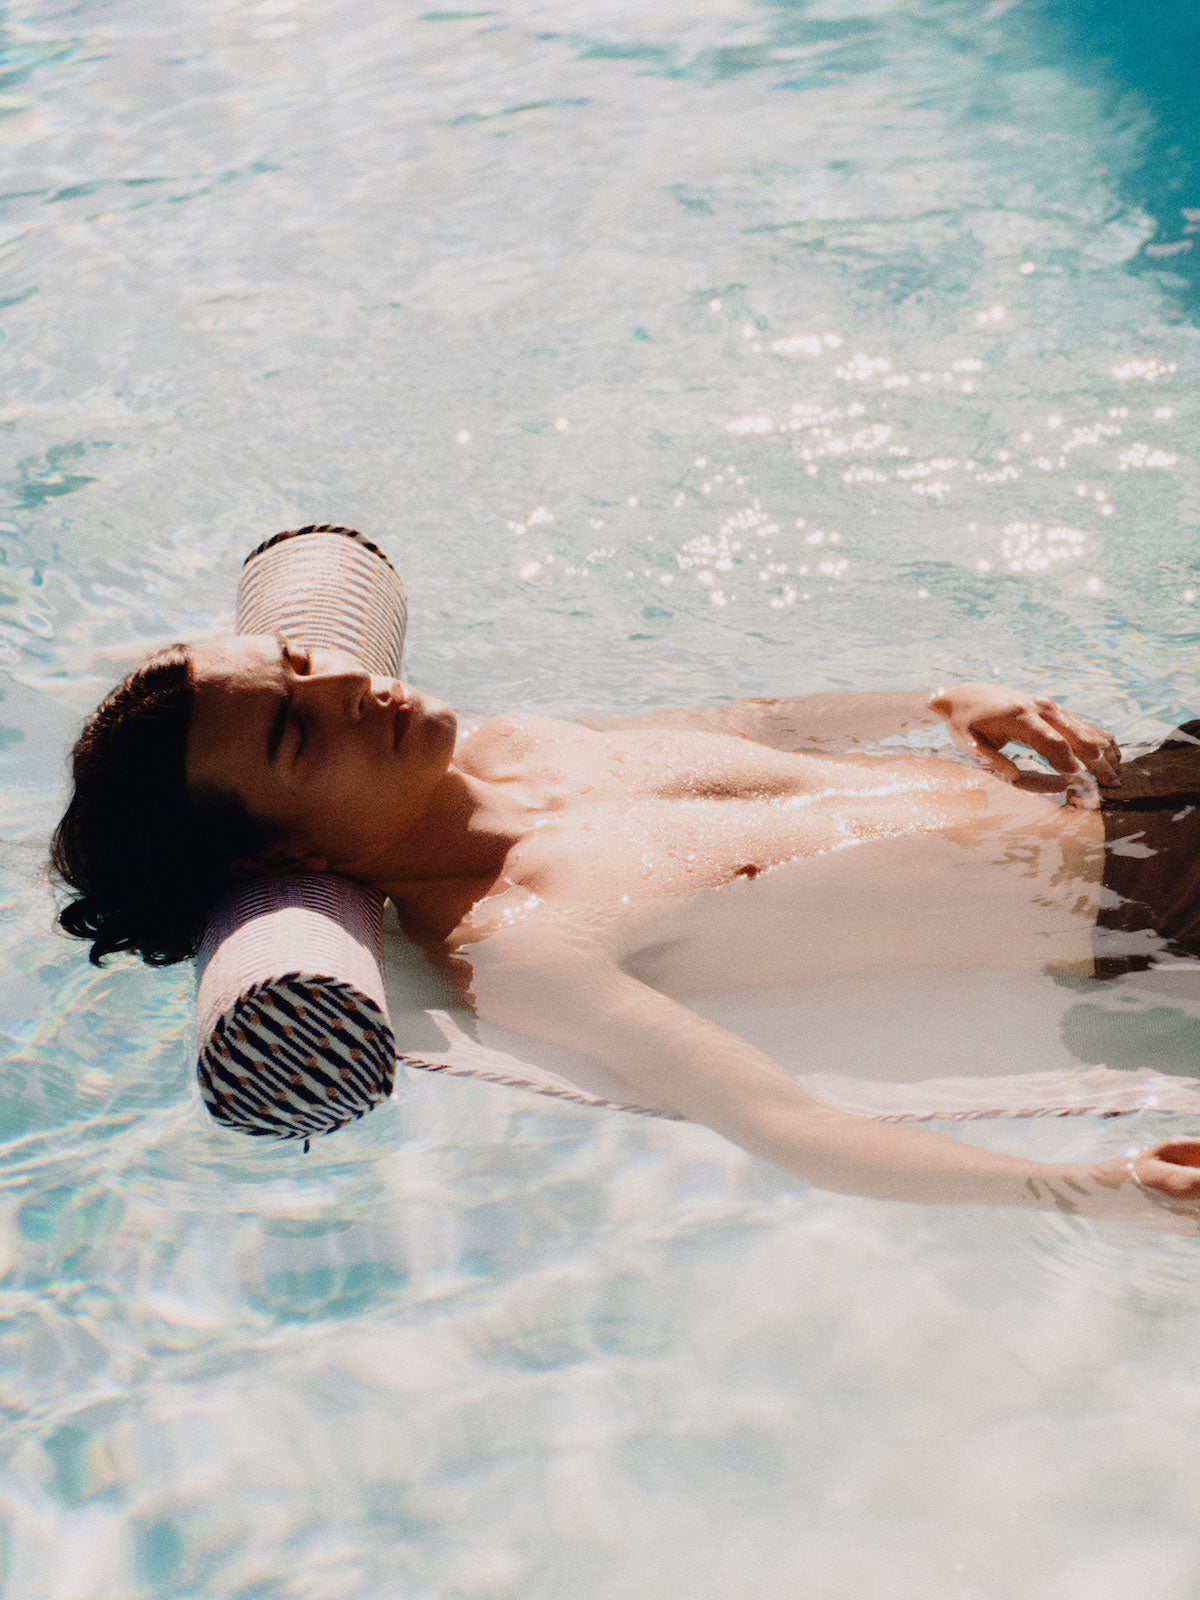 A man in a swimming pool relaxing on a luxury pool float